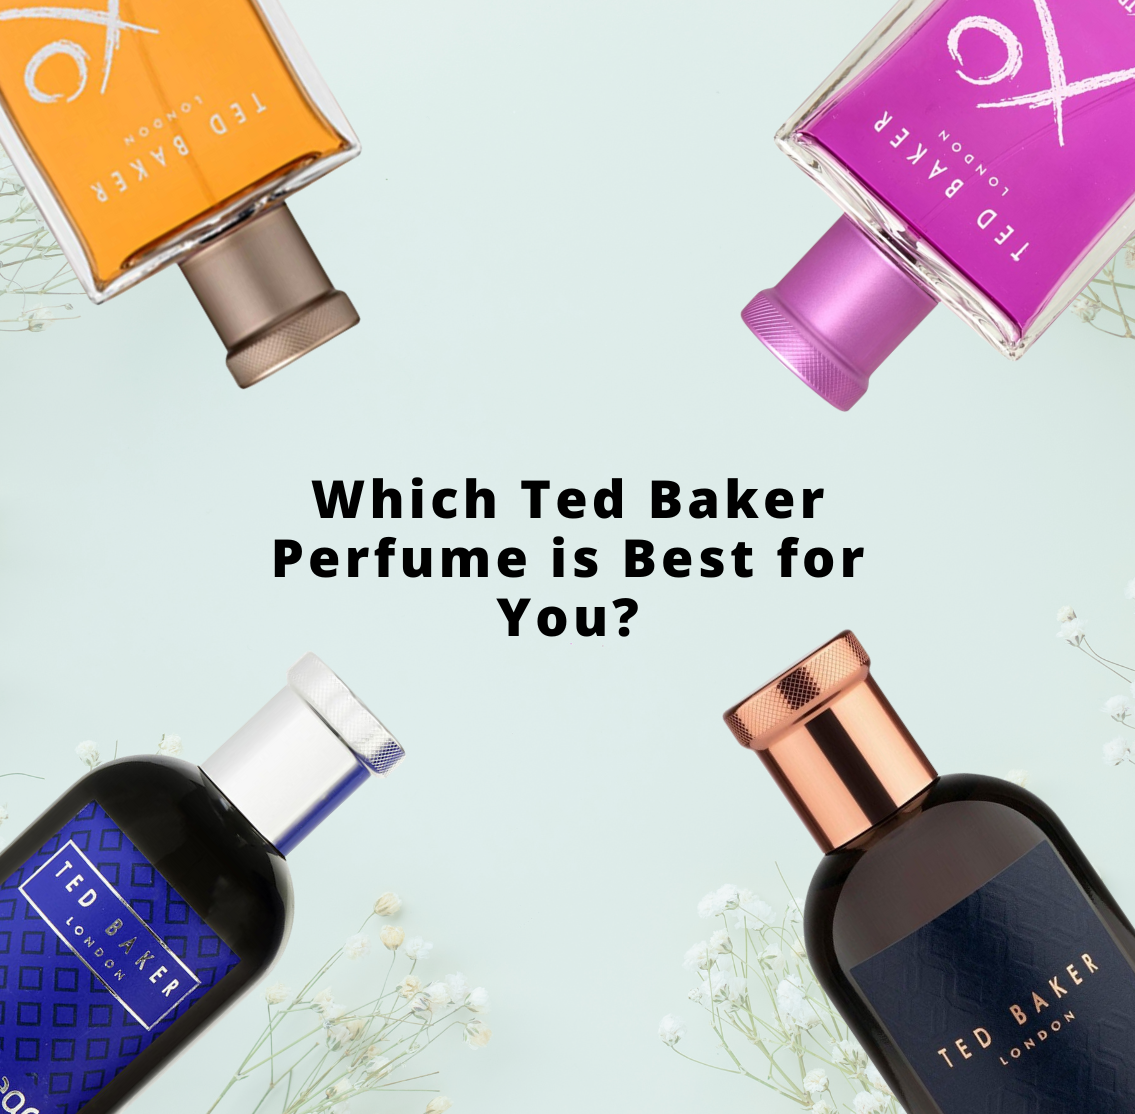 Which Ted Baker Perfume is Best for You?